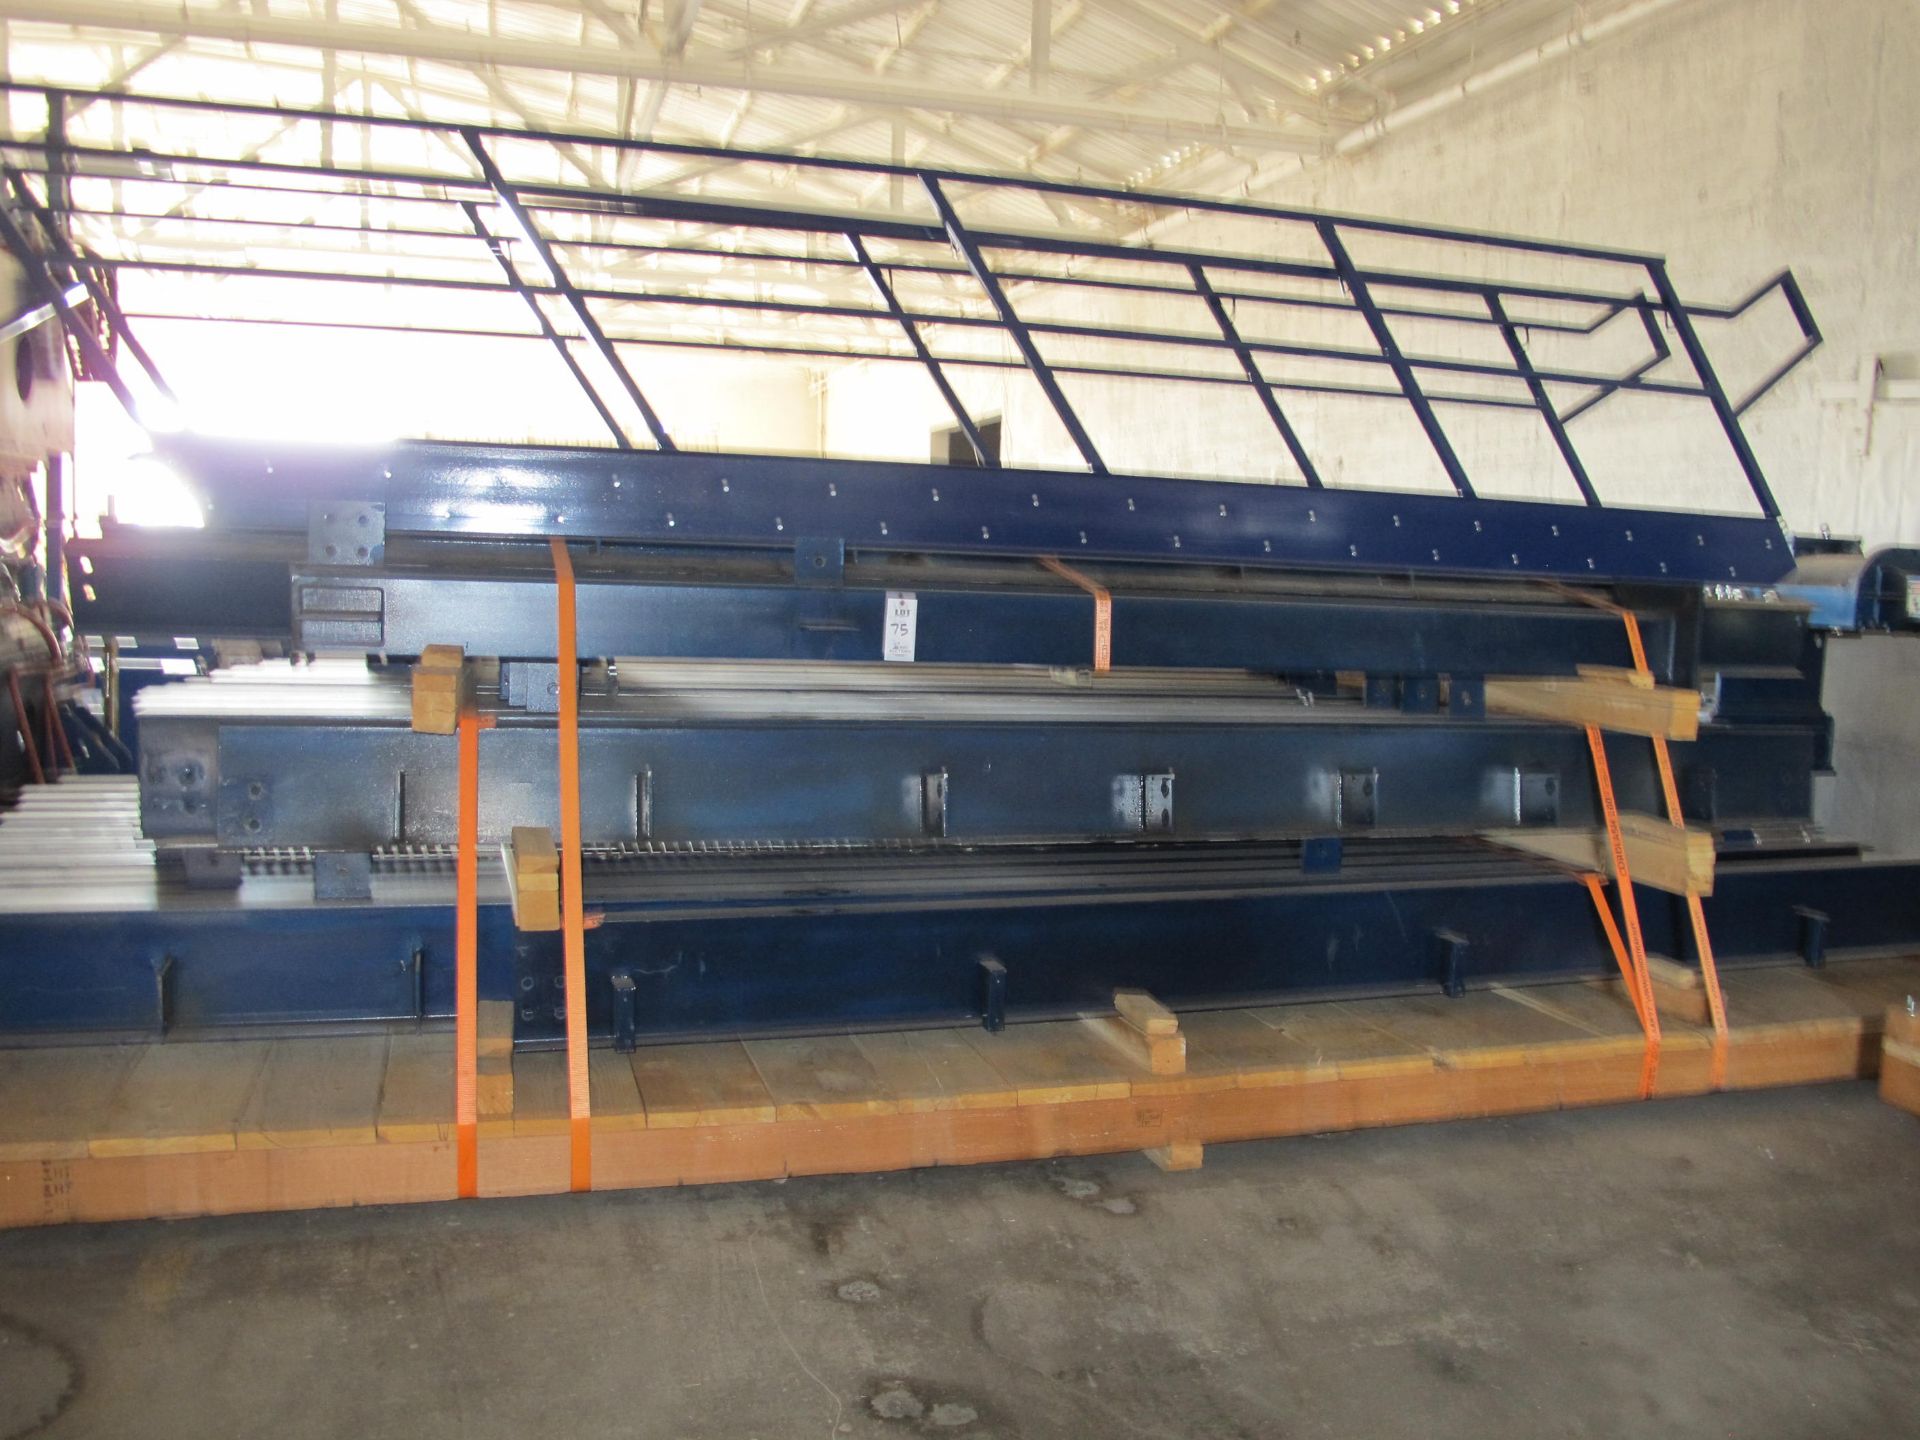 MEZZANINE STRUCTURE, STEEL DECK, ROUGHLY 40' X 40', STAIRS, HAND RAILS, PLATFORMS, ETC., LOADING & - Image 3 of 20